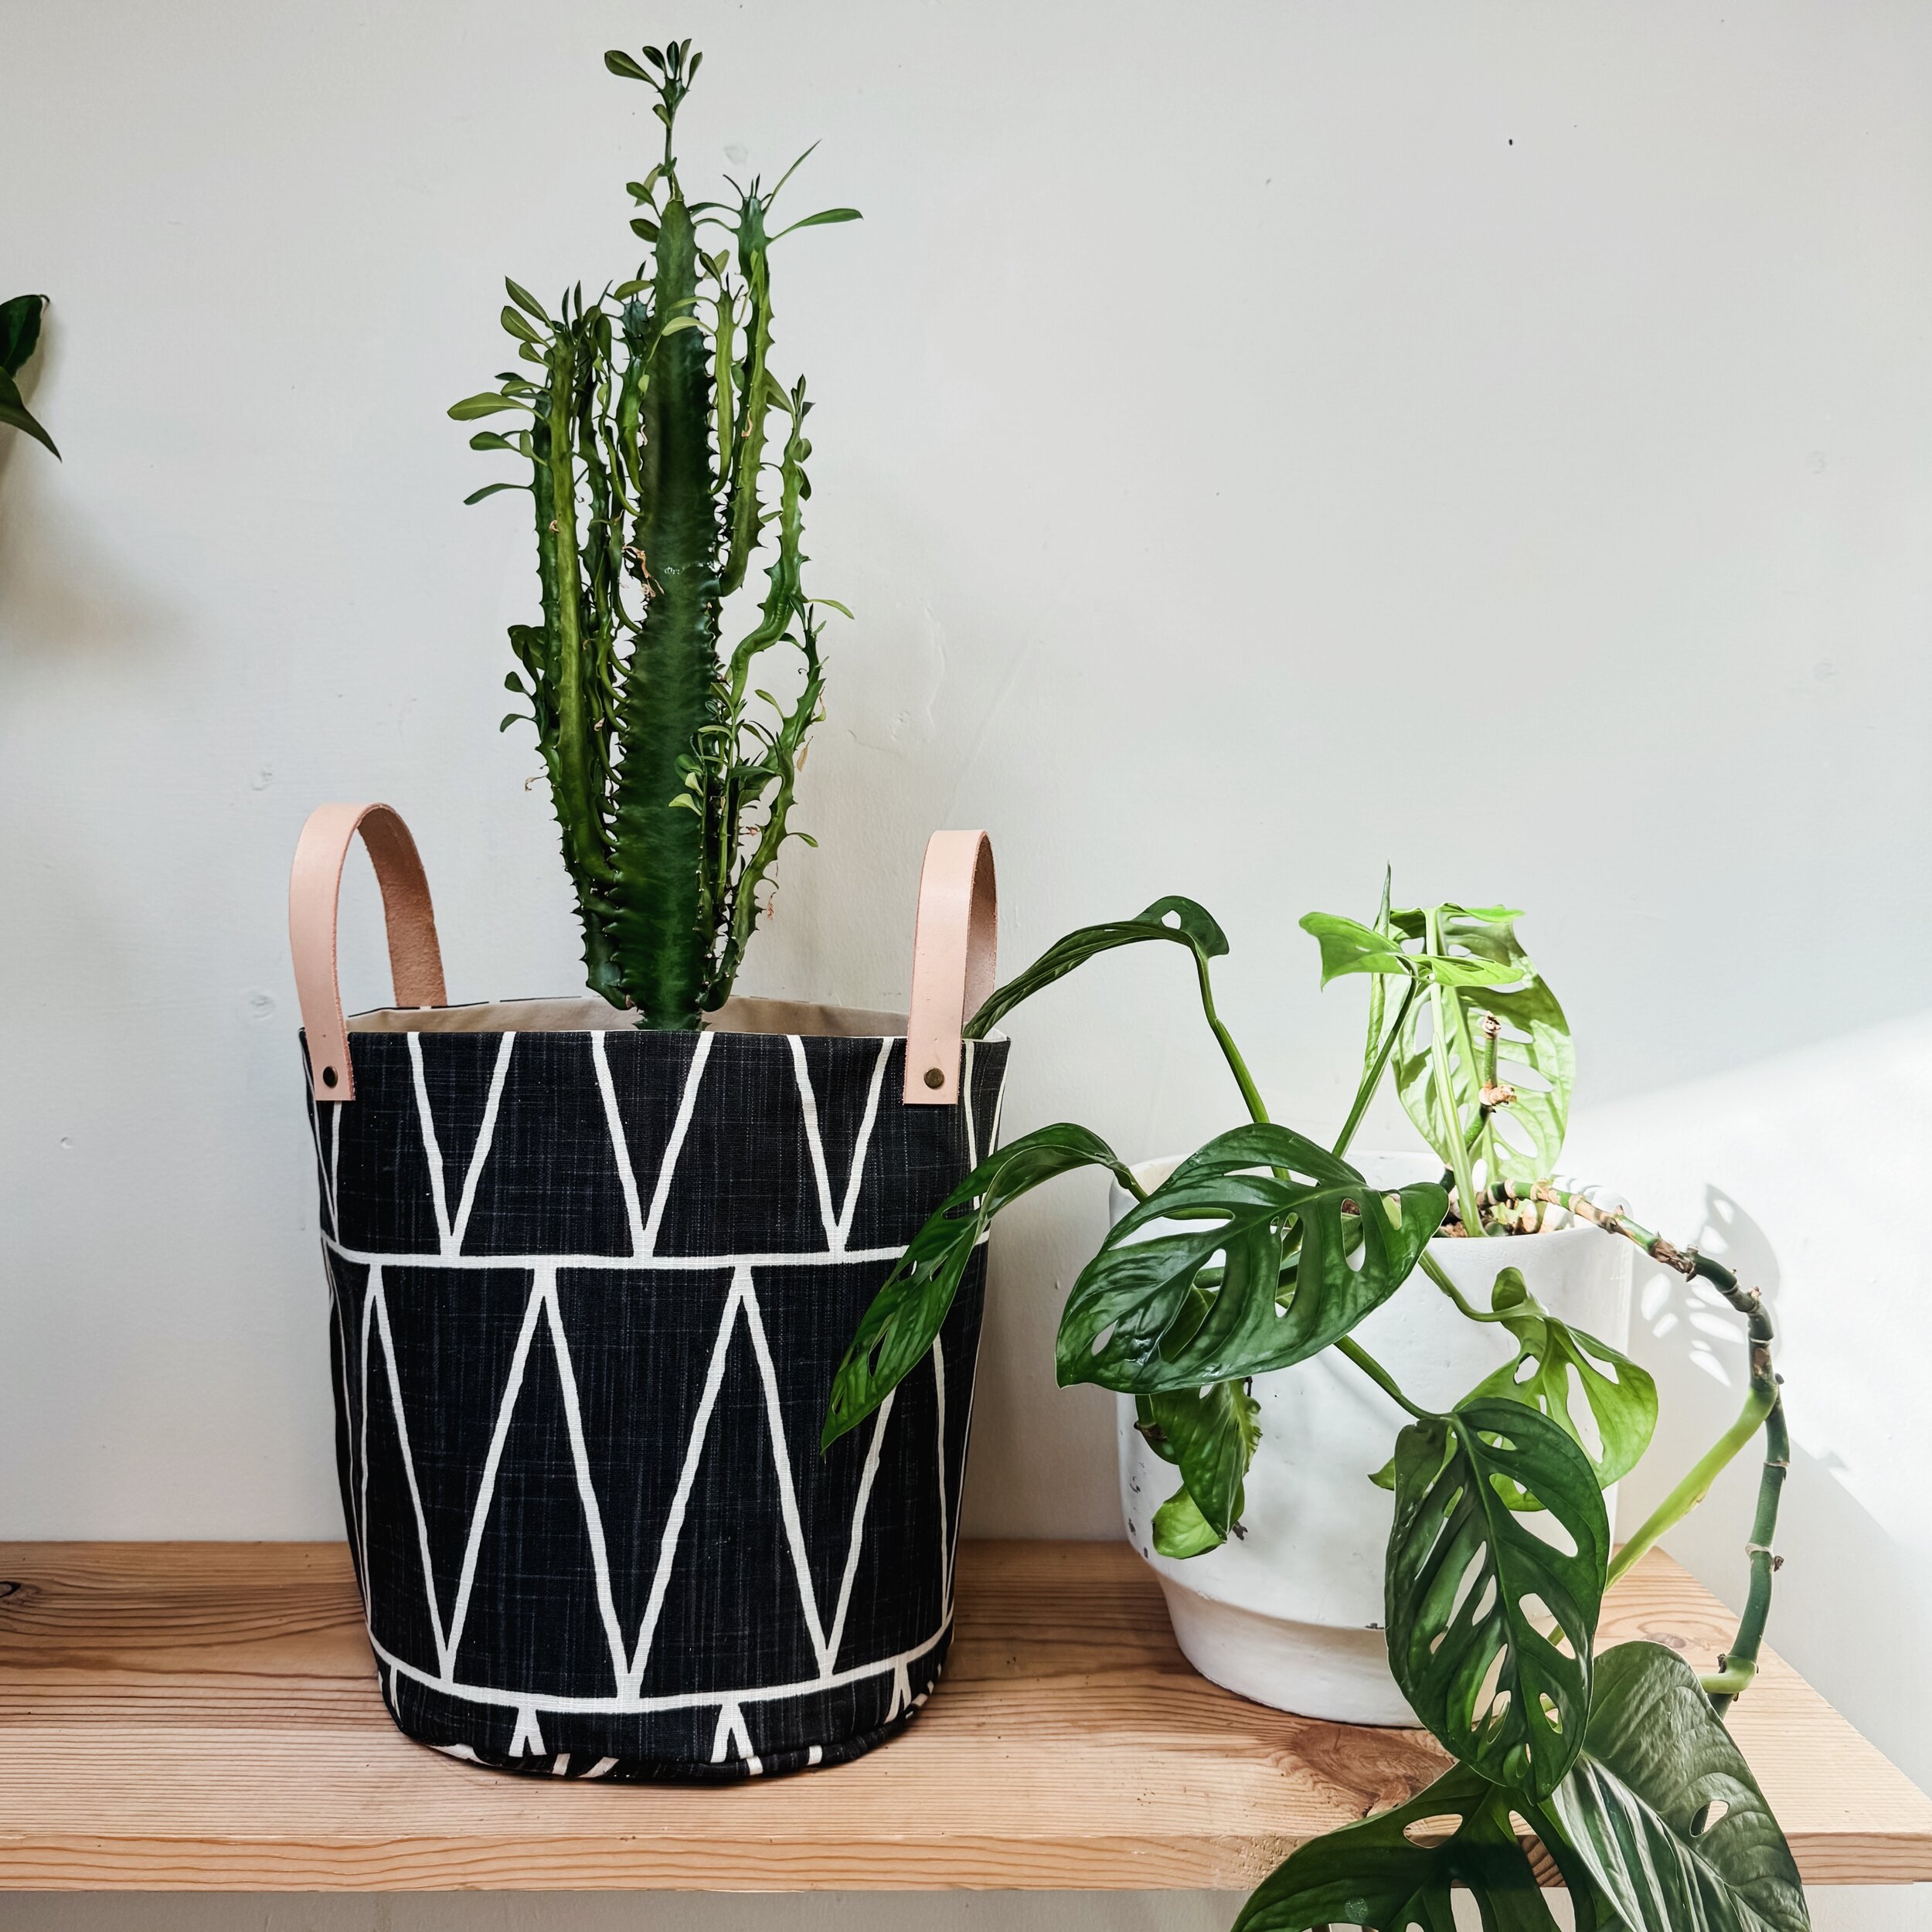 Fremont Basket in Charcoal Tri in medium. Perfect for plants and sunny days 🌿
.
.
.
.
.
.
.
.
#organization #modernhome #interiordecor #beautifulhome #function #storage #storageinstyle #organization #moderninteriors #frankieandcocopdx #canvasbasket 